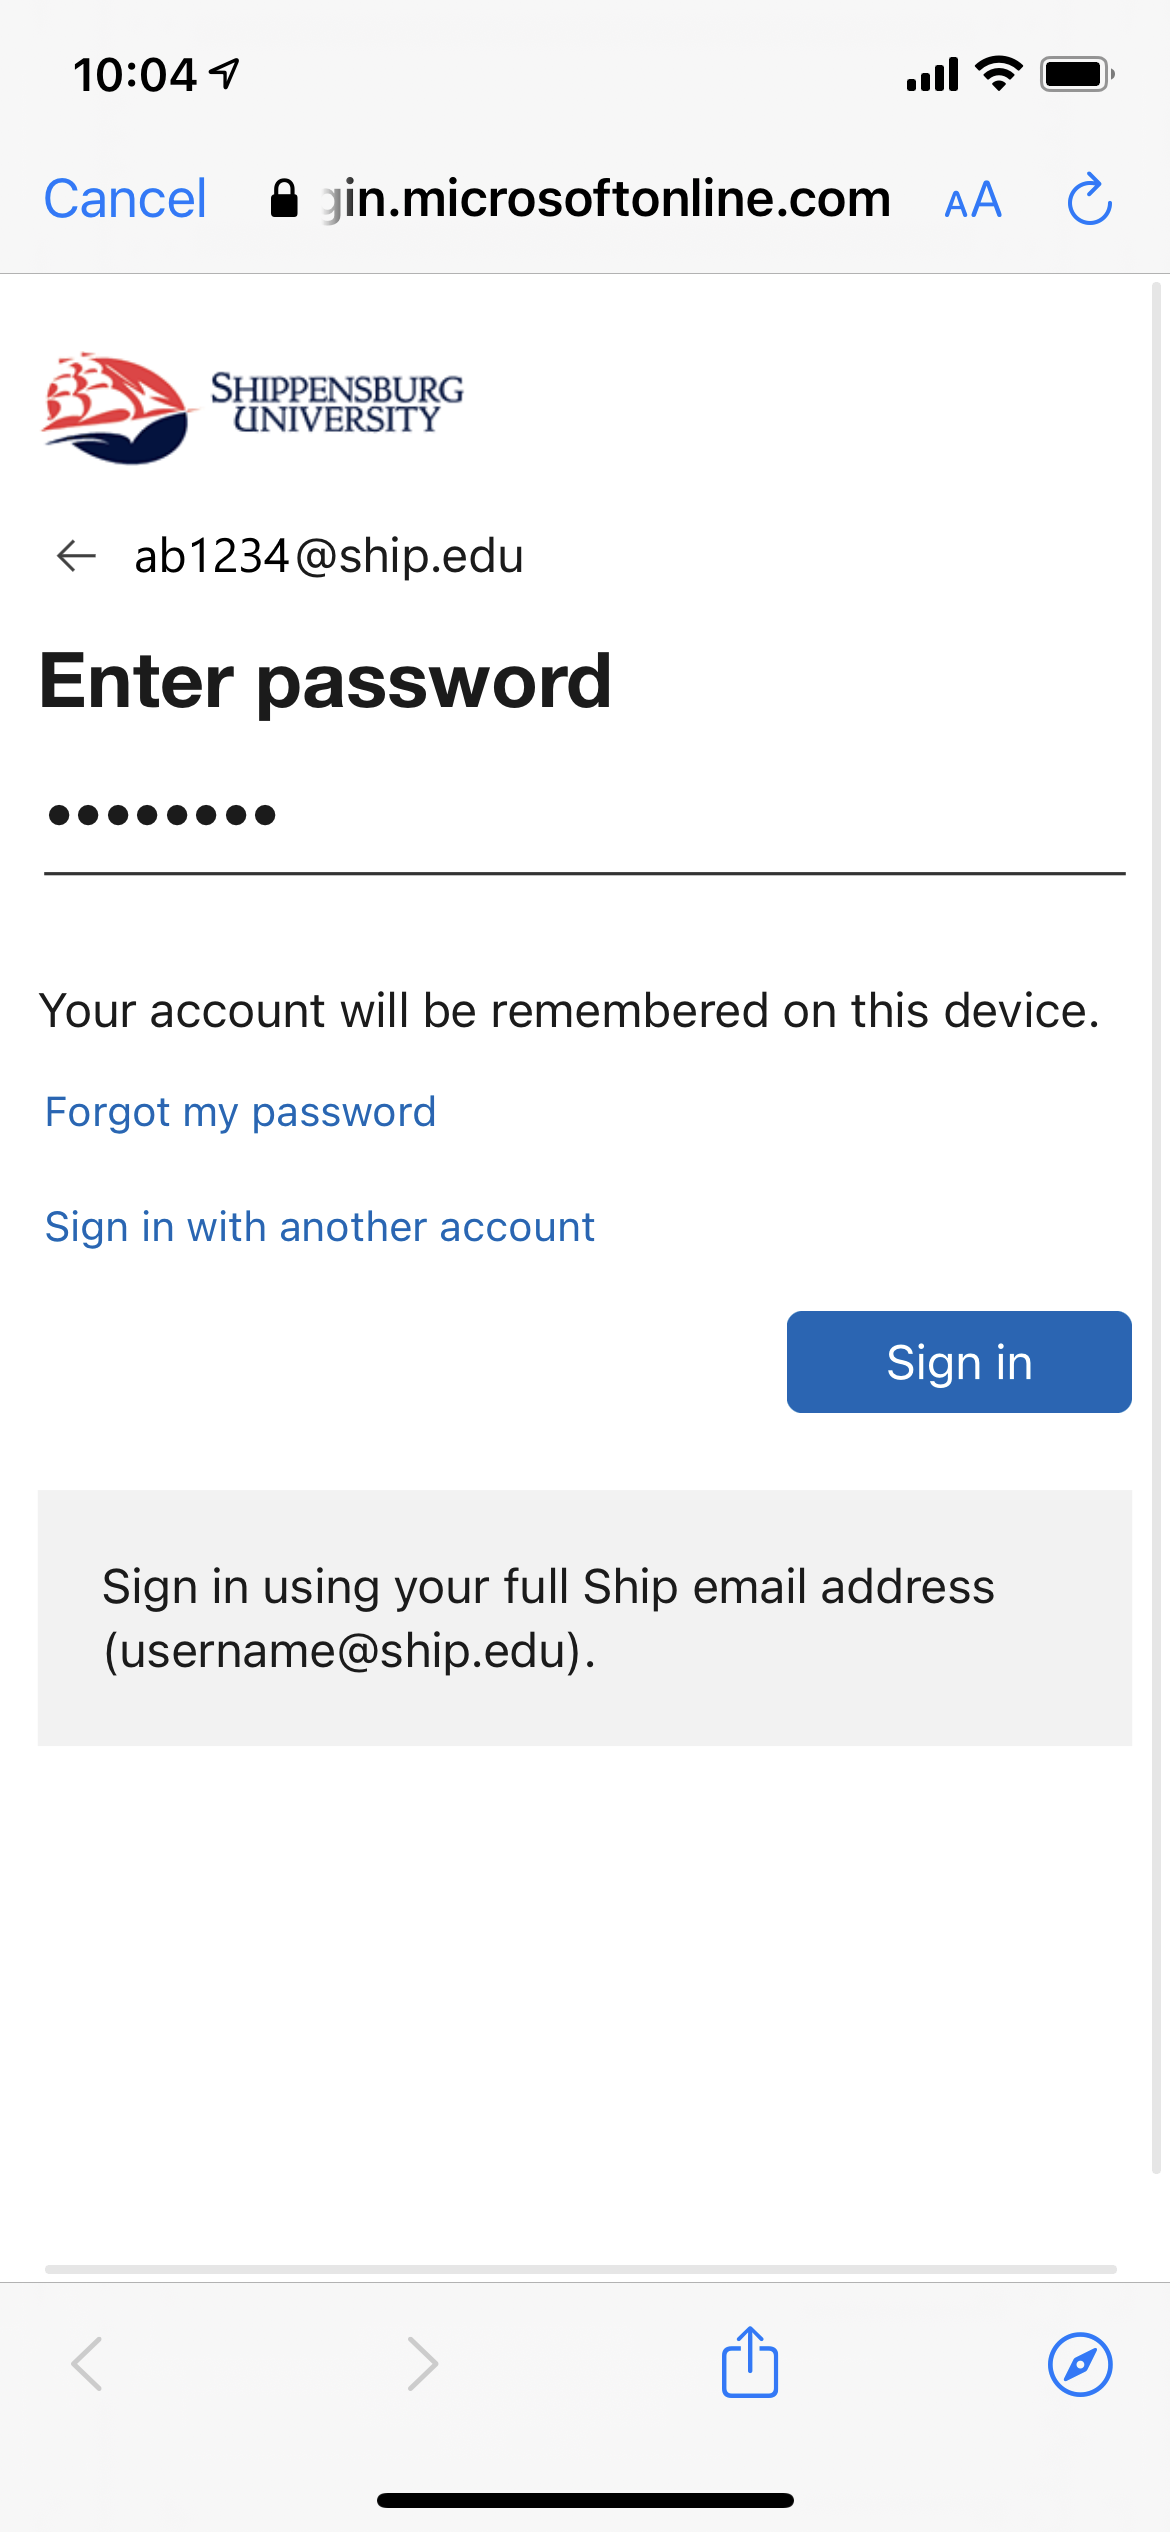 Enter your password and Sign in